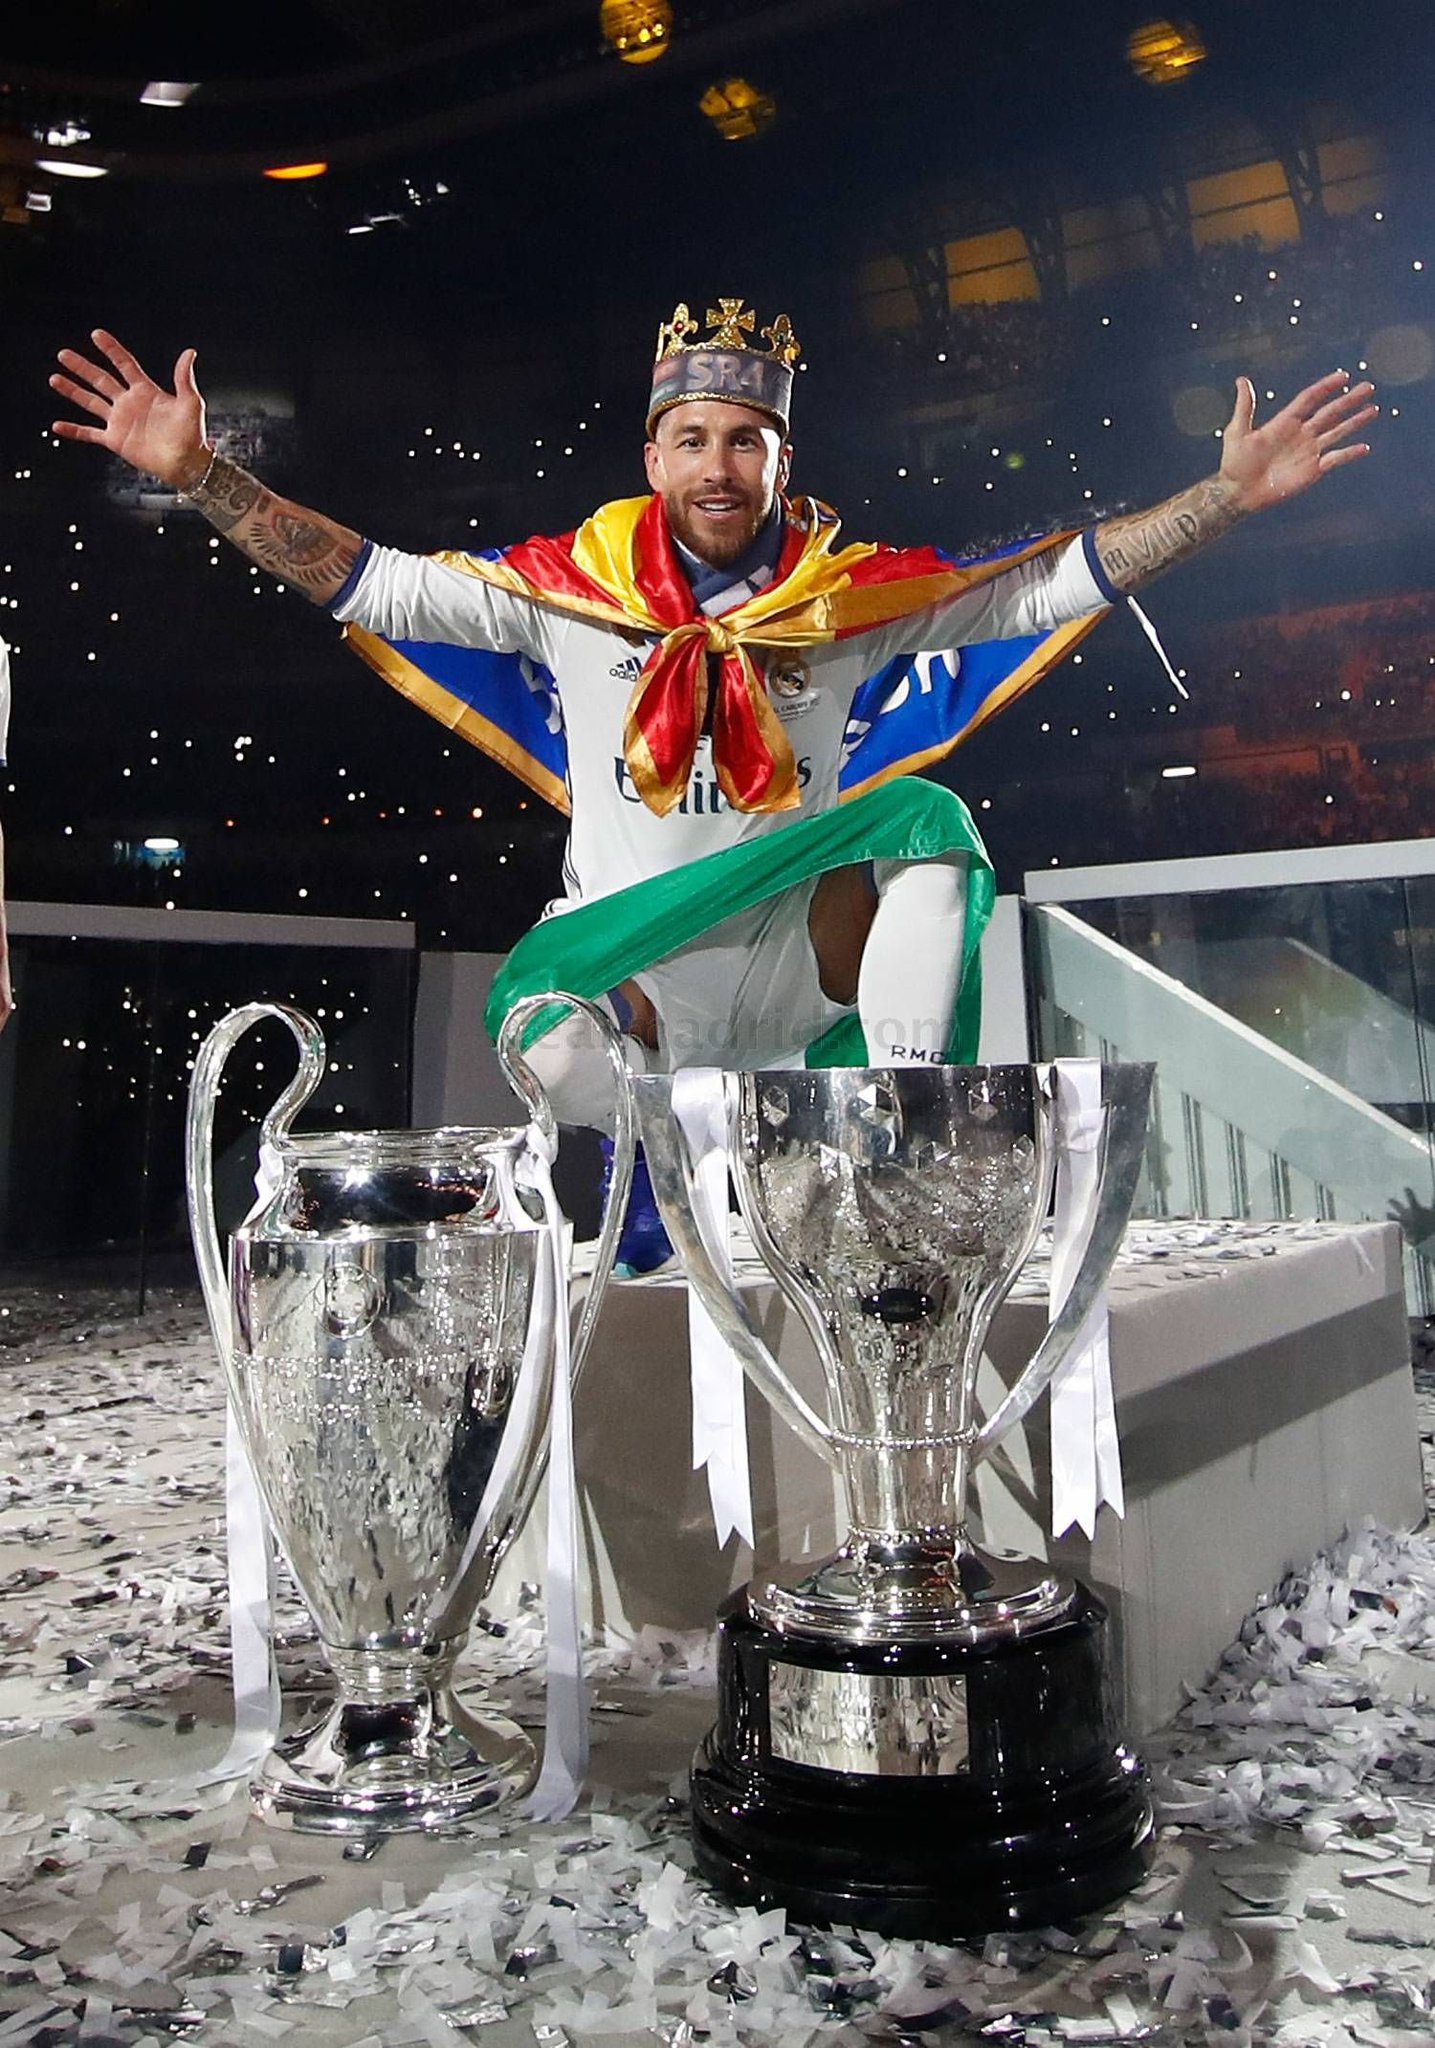 OFFICIAL: Ramos To Leave Real Madrid After 16 Years 